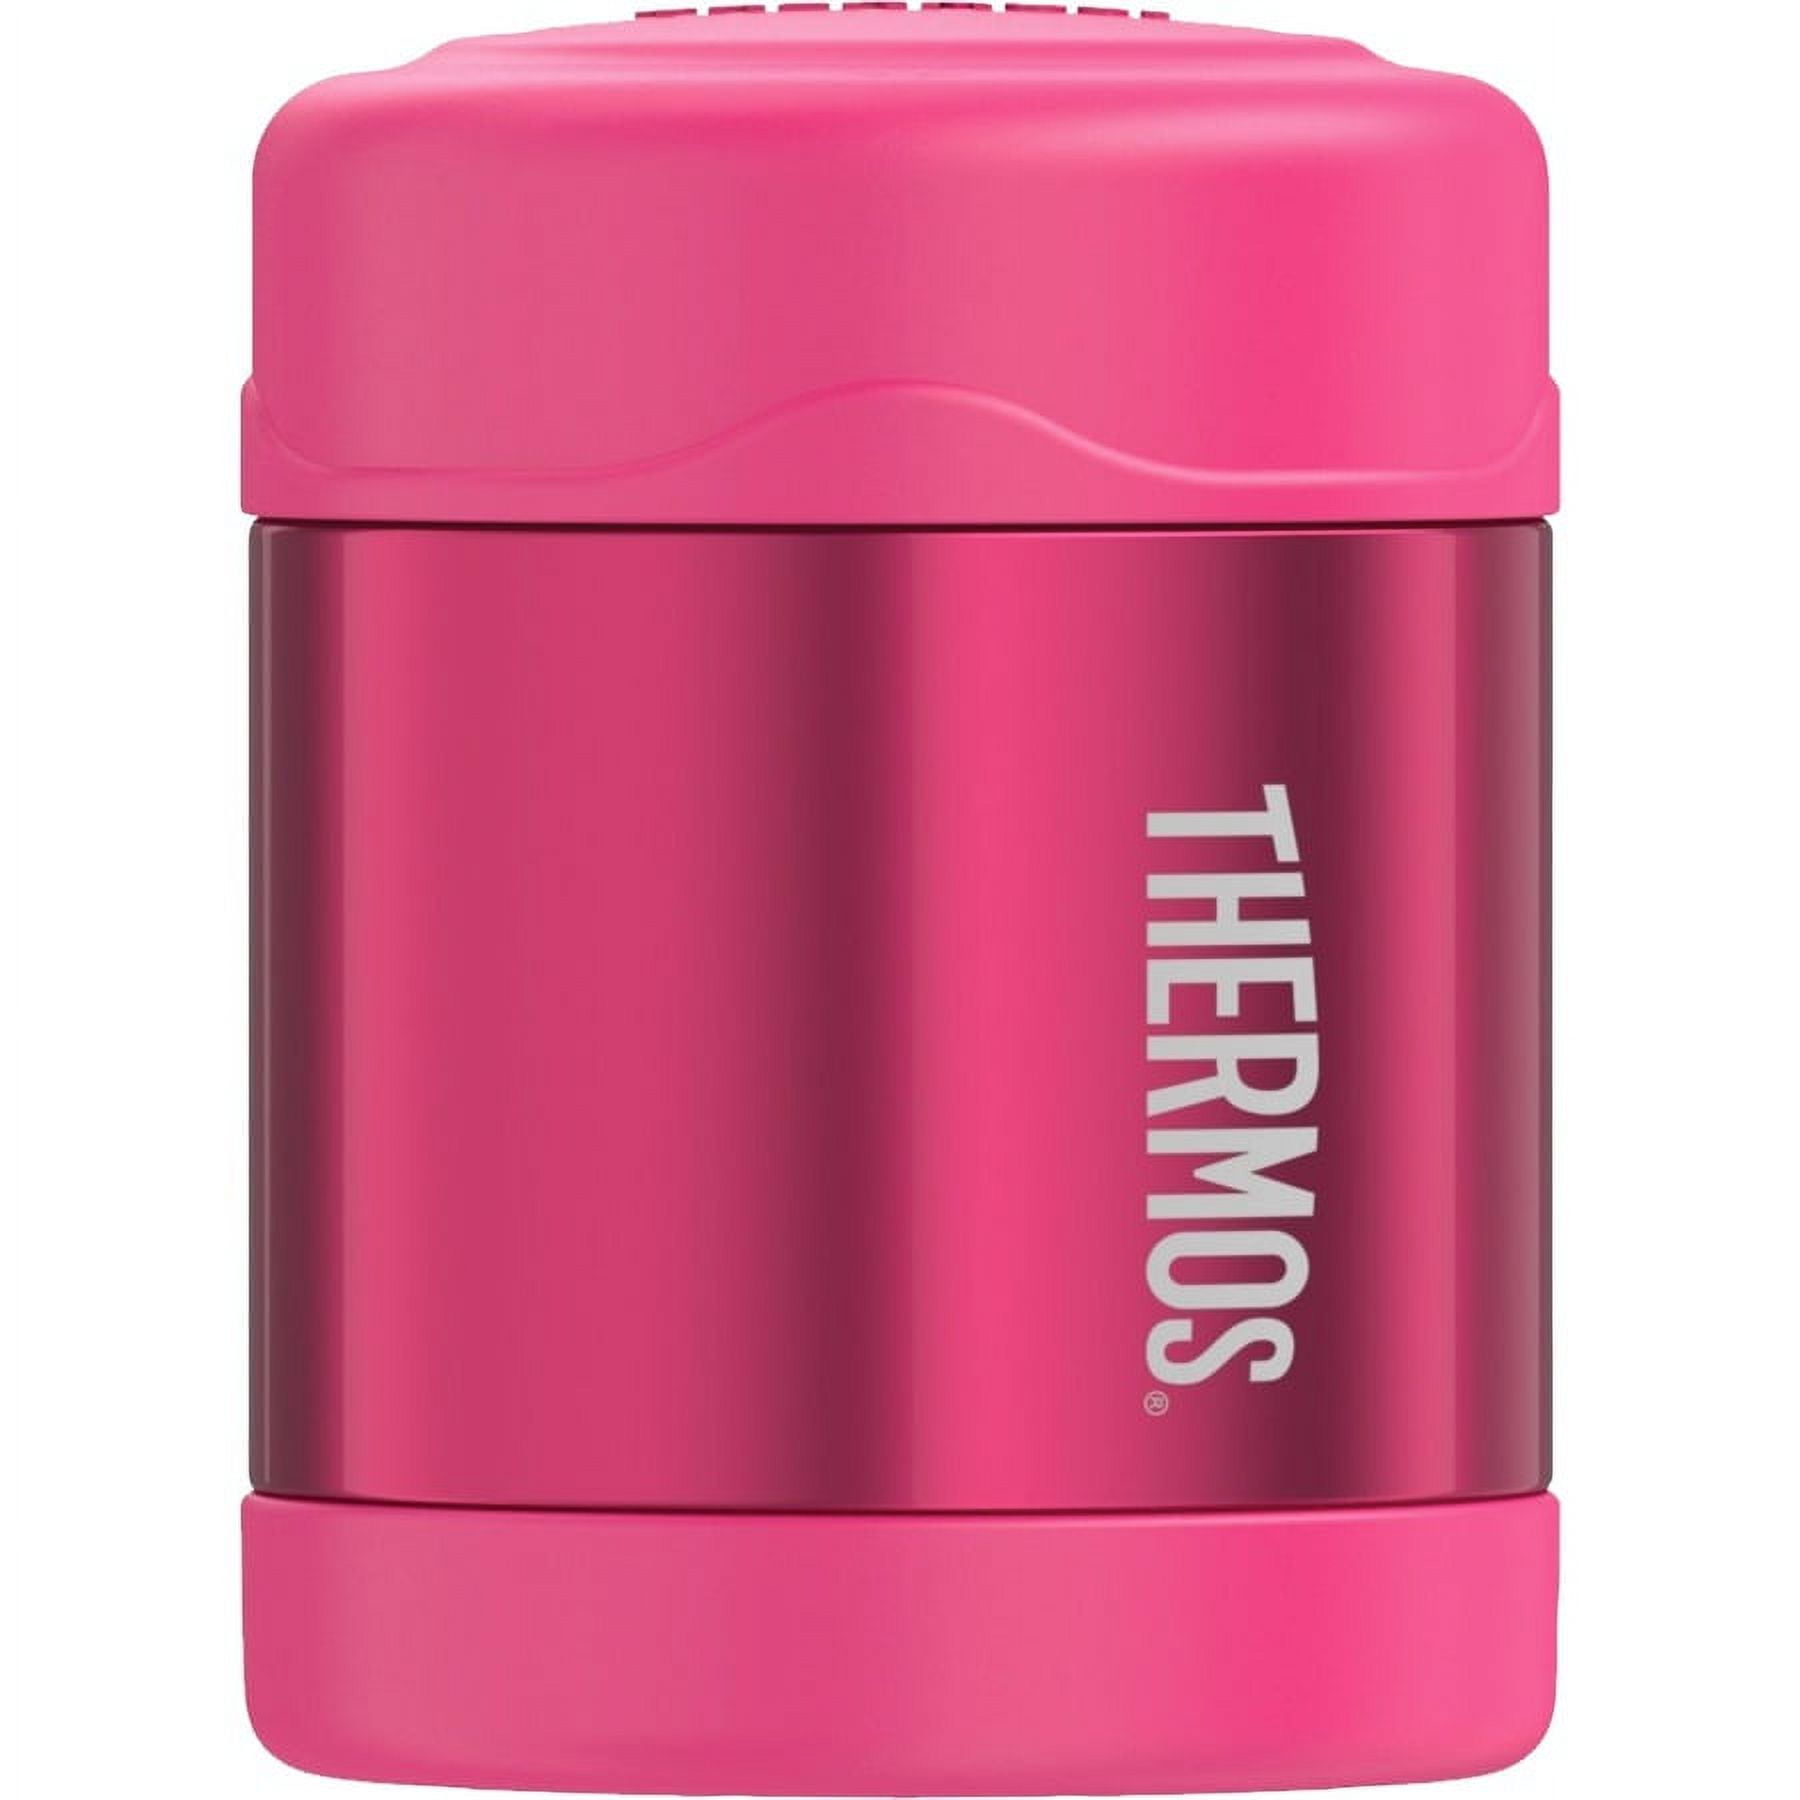 Thermos Lunch Box /Funtainer Food Jar Cheetah Pink Green w/Liner 10 oz  Stainless